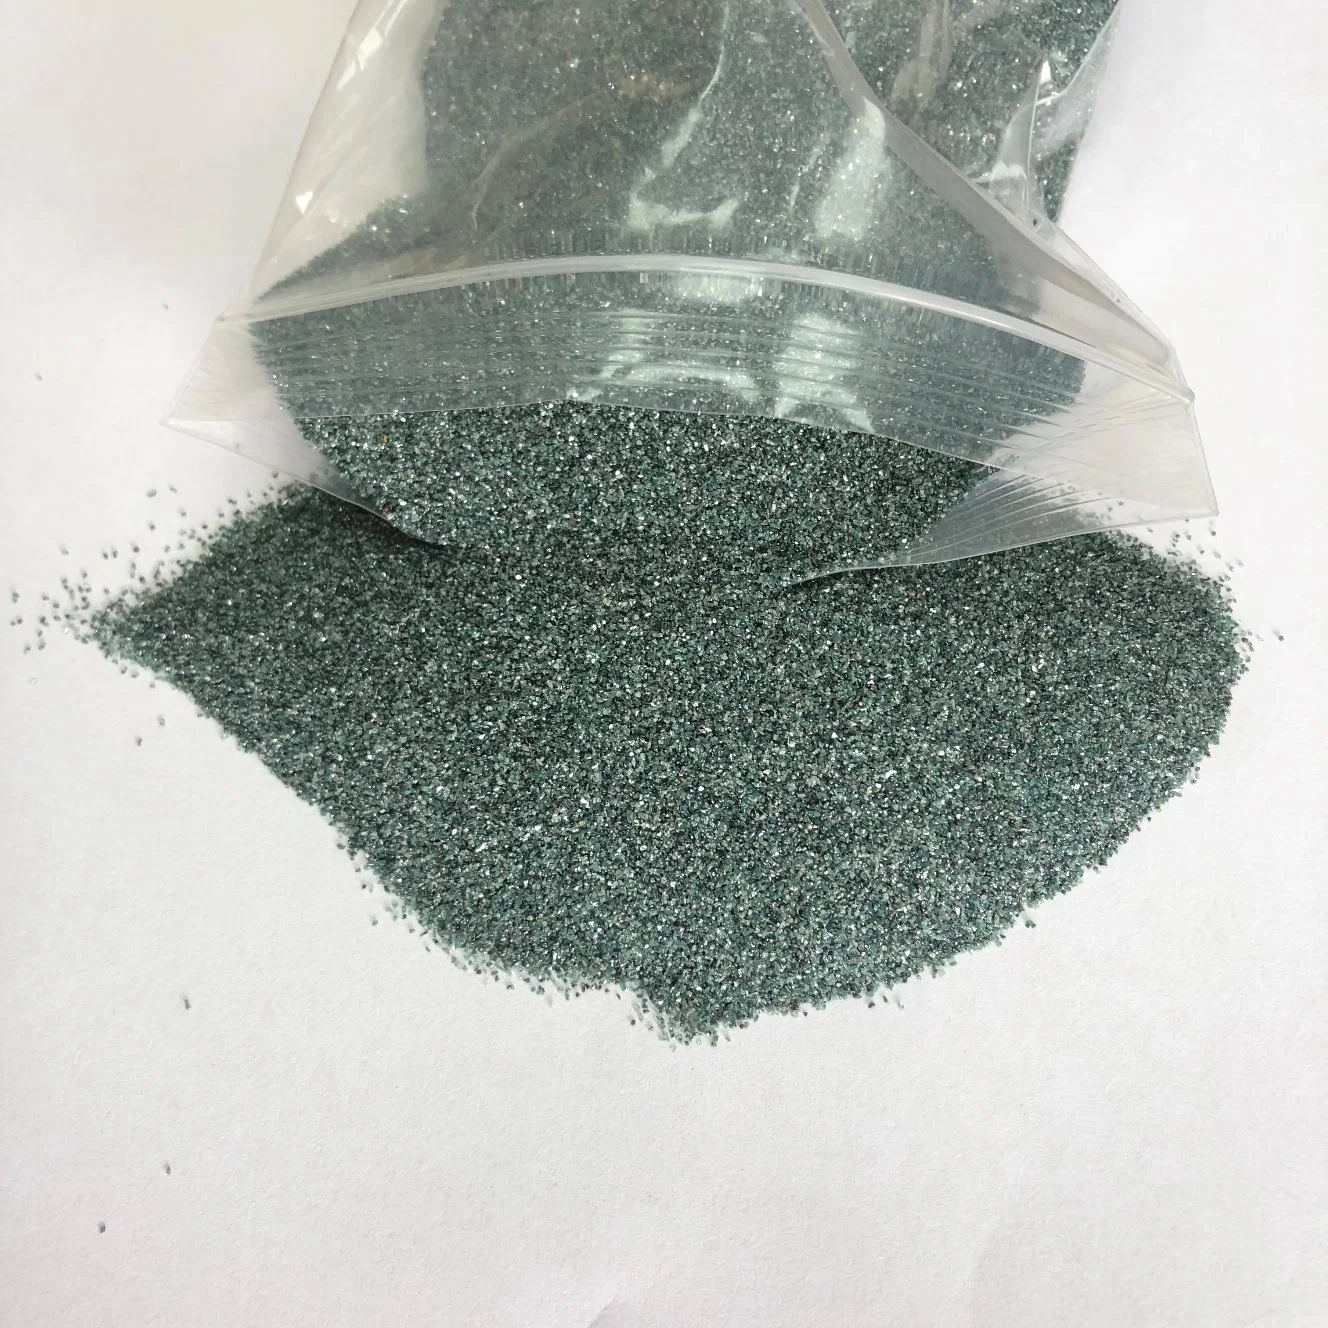 Green Sic Abrasive Silicon Carbide for Bonded/Coated Abrasives